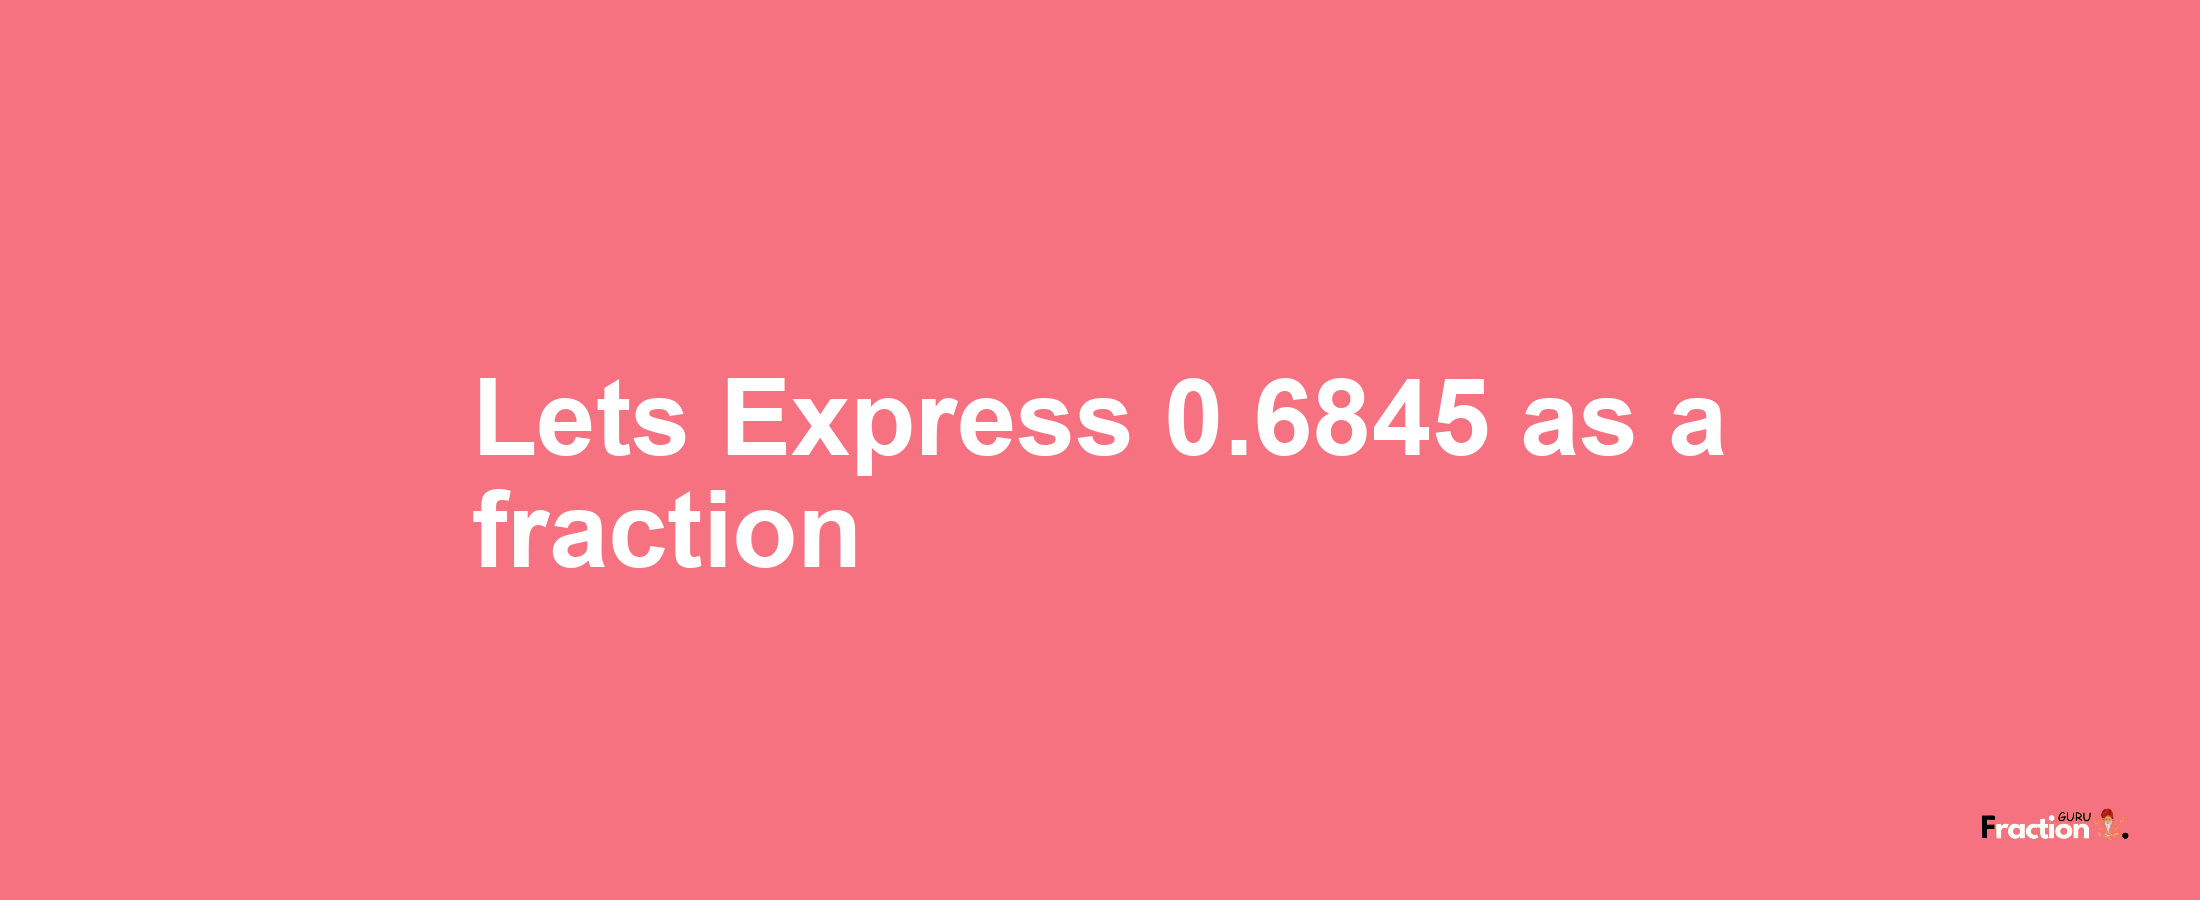 Lets Express 0.6845 as afraction